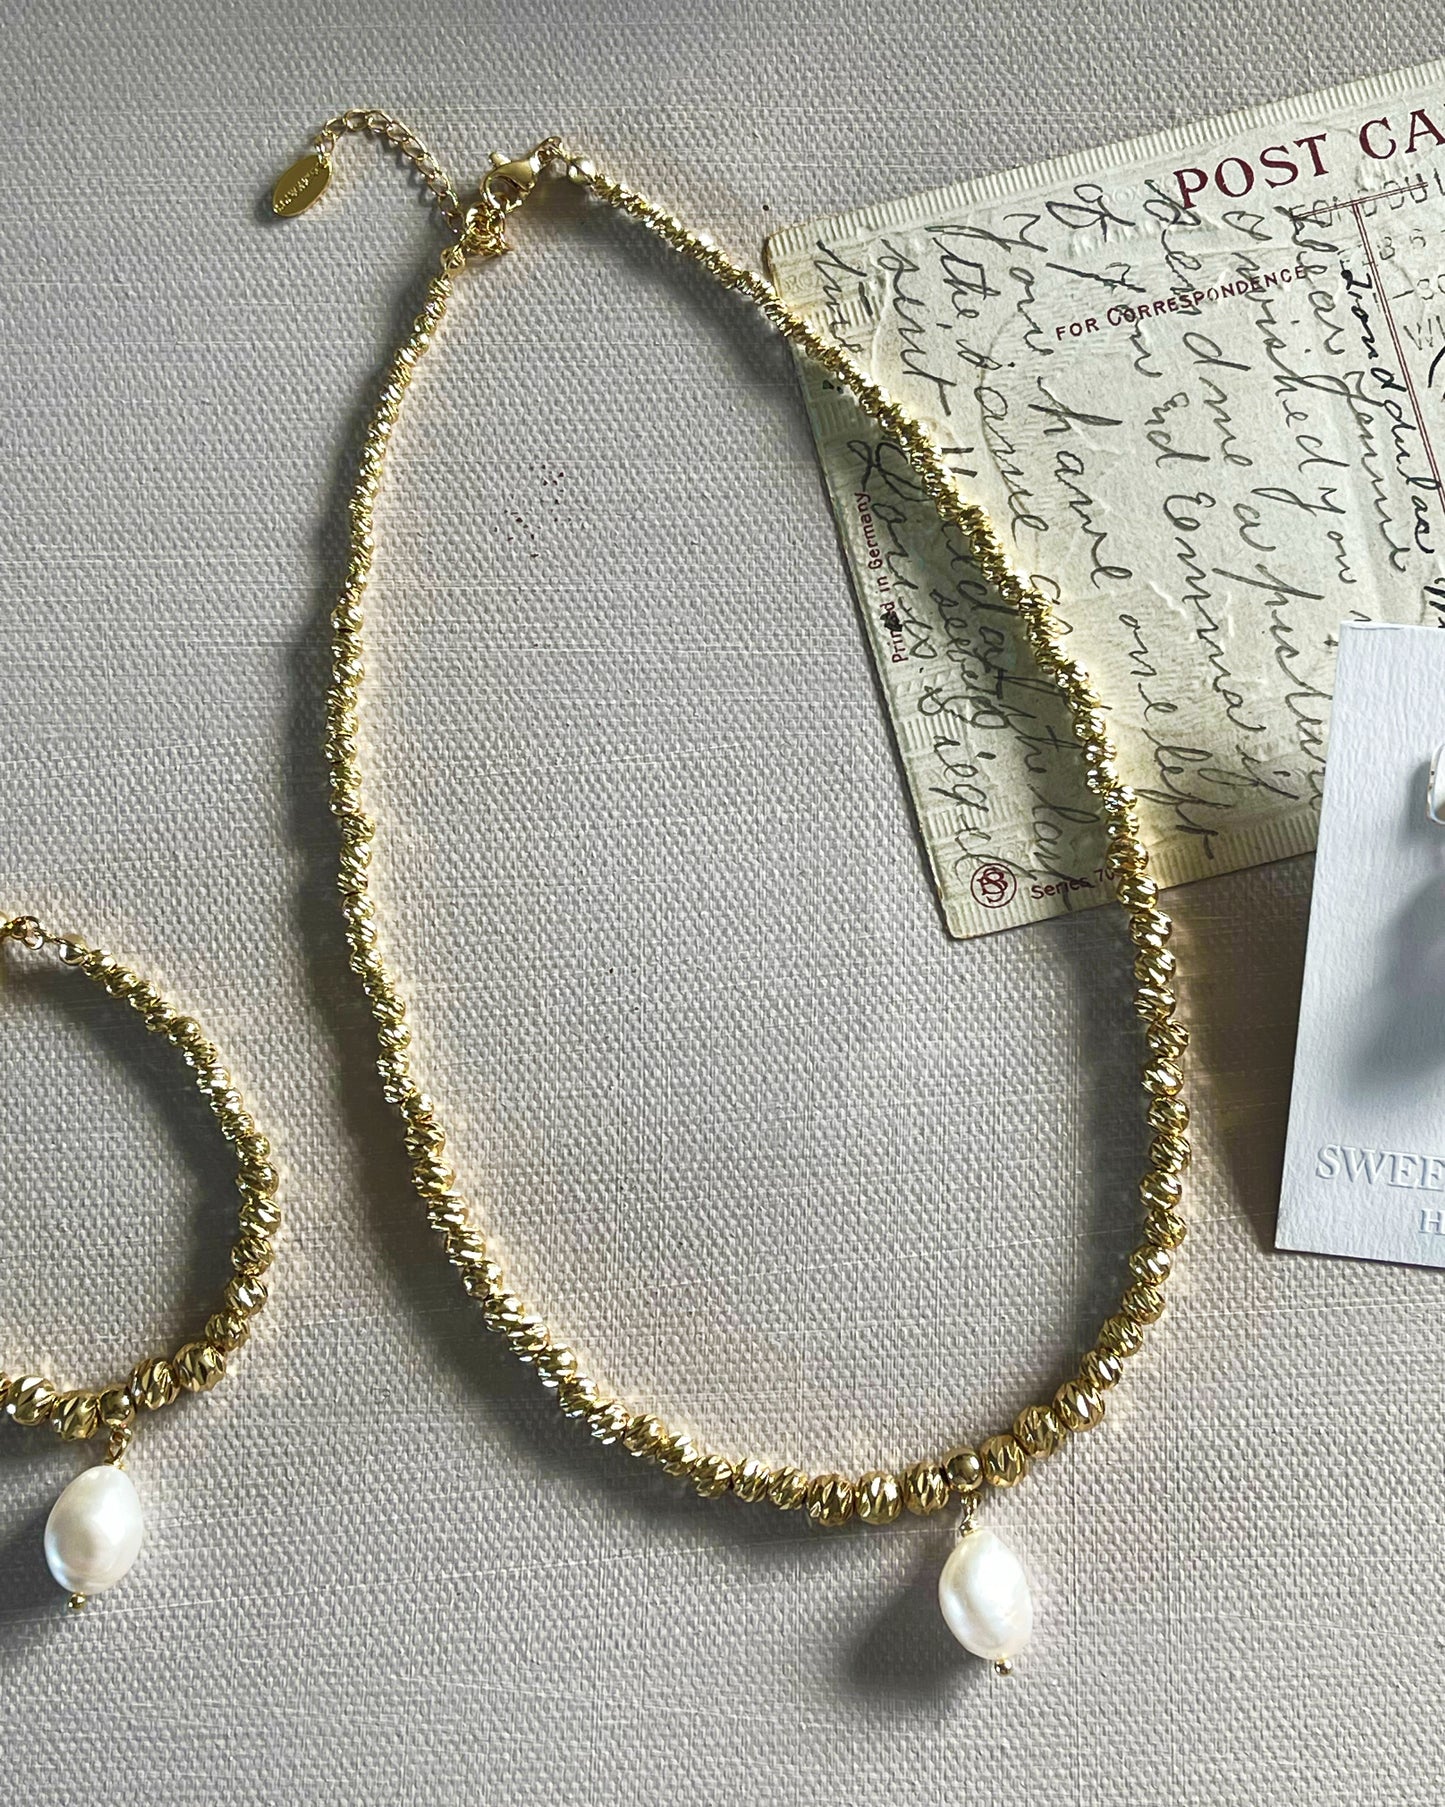 Autumn field of gold and freshwater pearl necklace